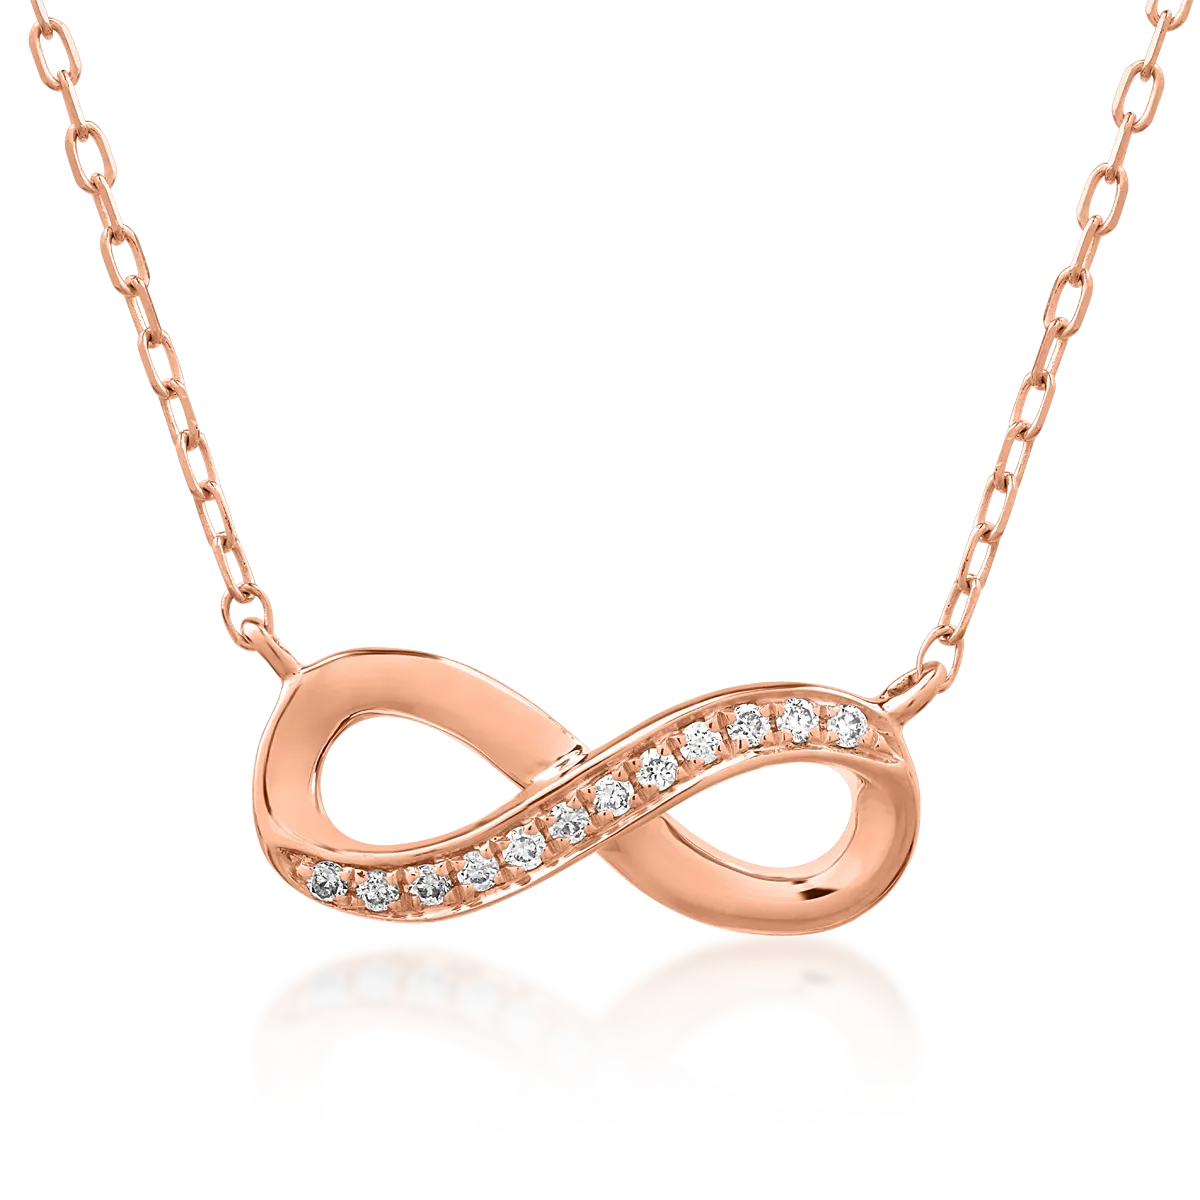 Rose gold infinity pendant necklace with 0.03ct diamonds